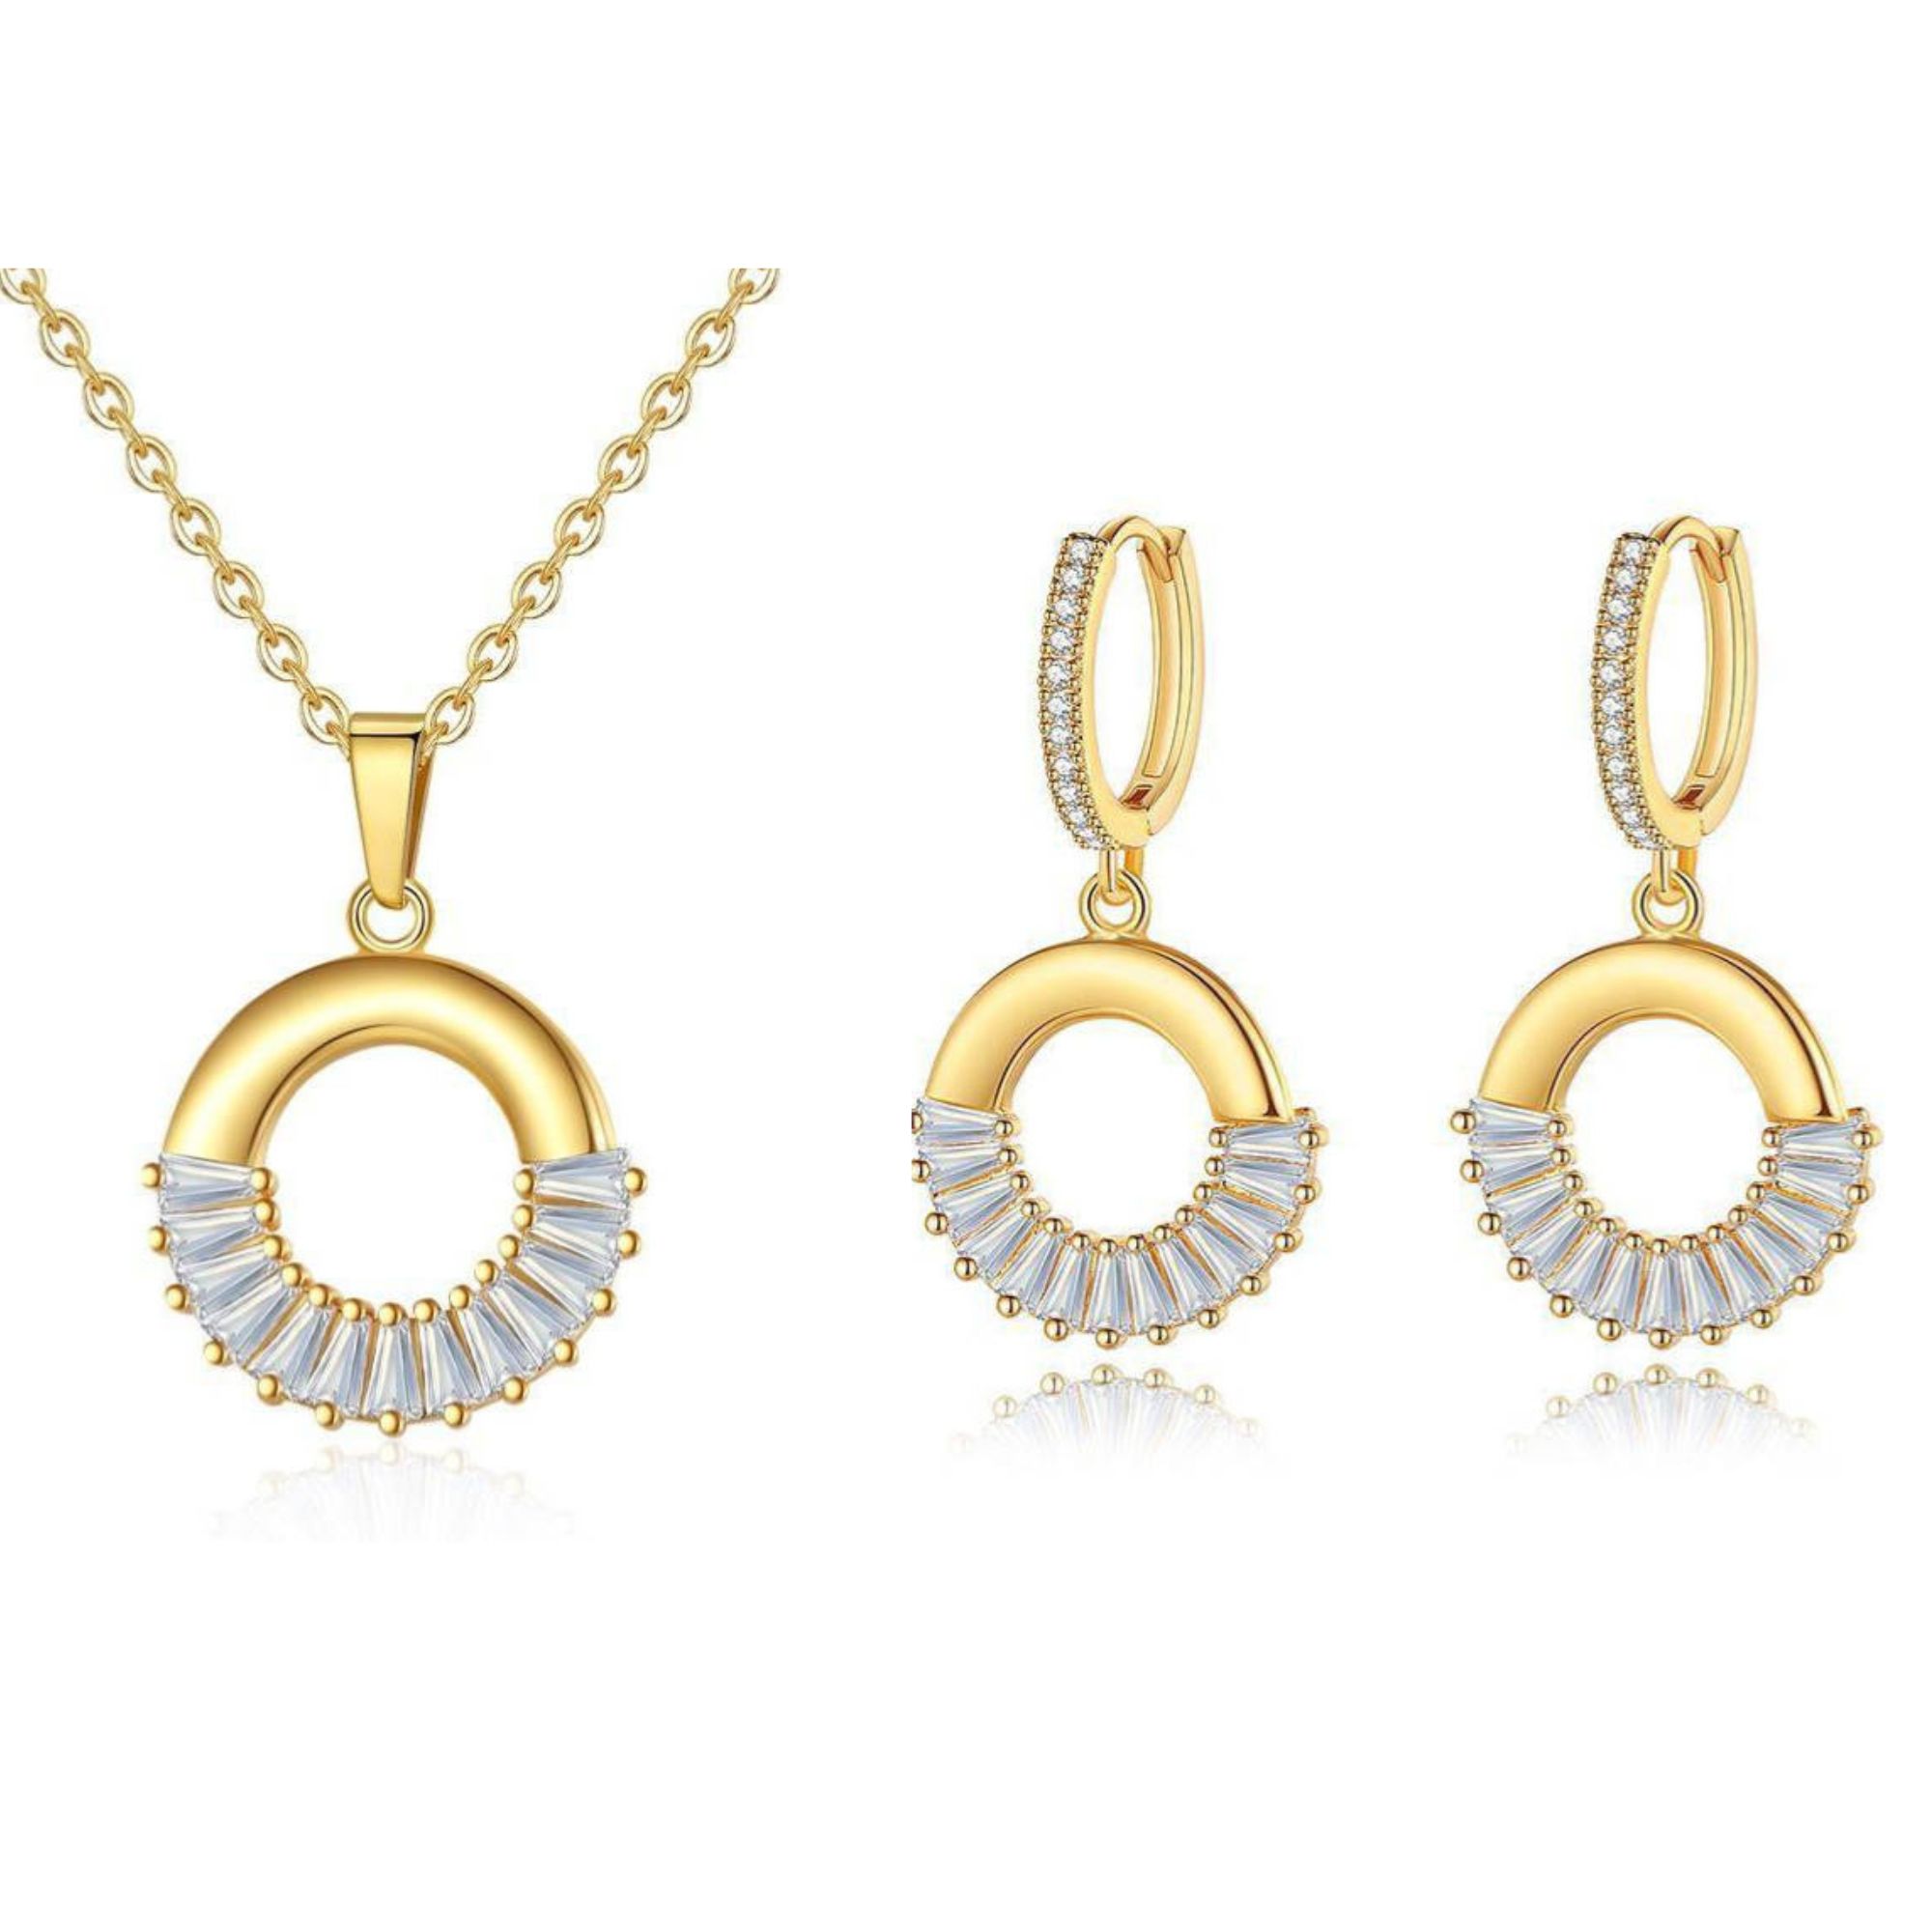 10 Sets-Gold Tone Crystal Round Crystal Pendant Necklace and Earrings Jewellery Set|GCJ607-Necklace&Earrings|UK seller